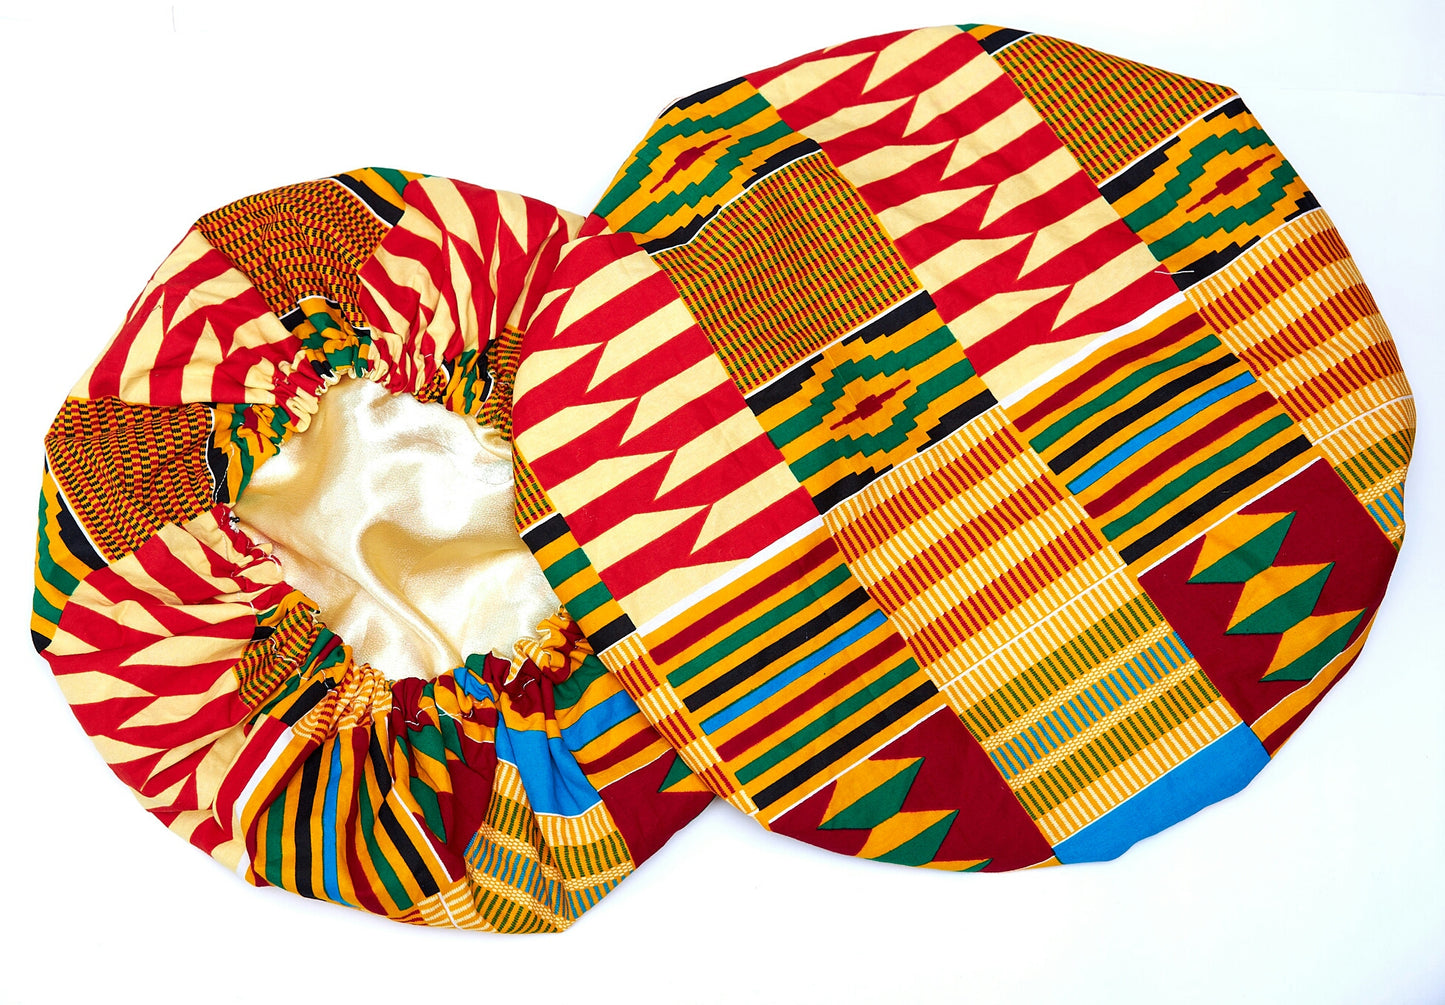 Ghanaian Kente Print Made of Pink, yellow, Black and Gold Blended Beautiful Colours, Hand Made Elastic Silklined Bonnet With Band